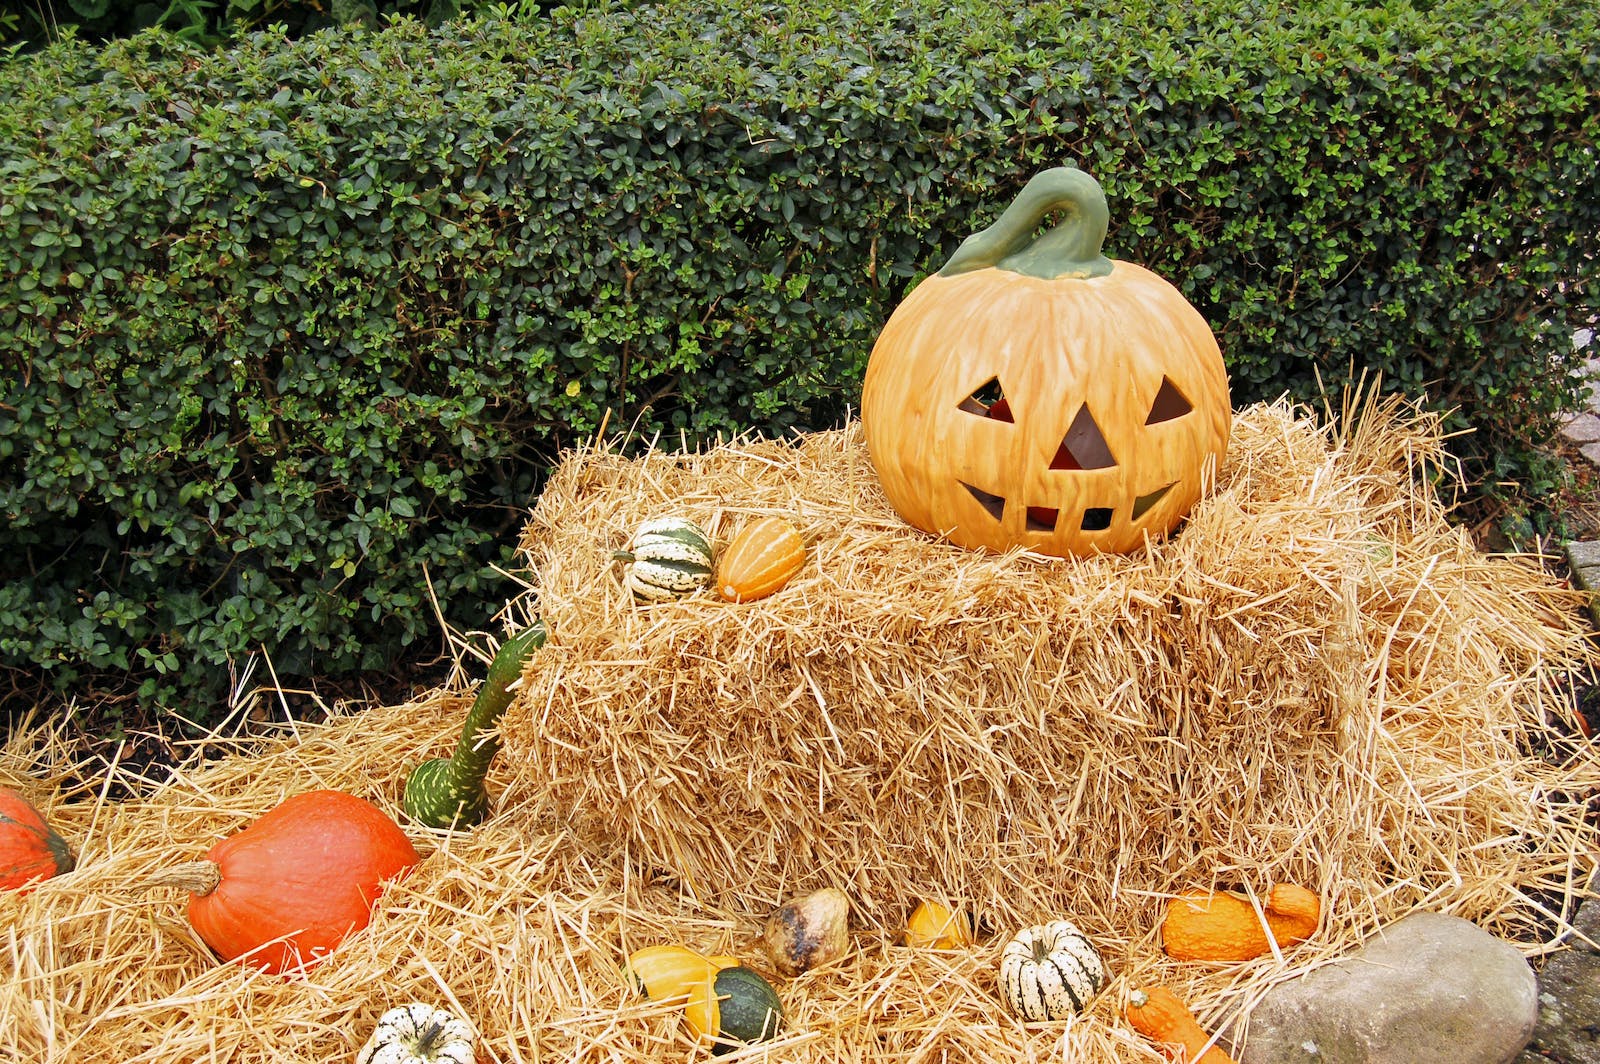 A large carved pumpkin sat on a hay bale